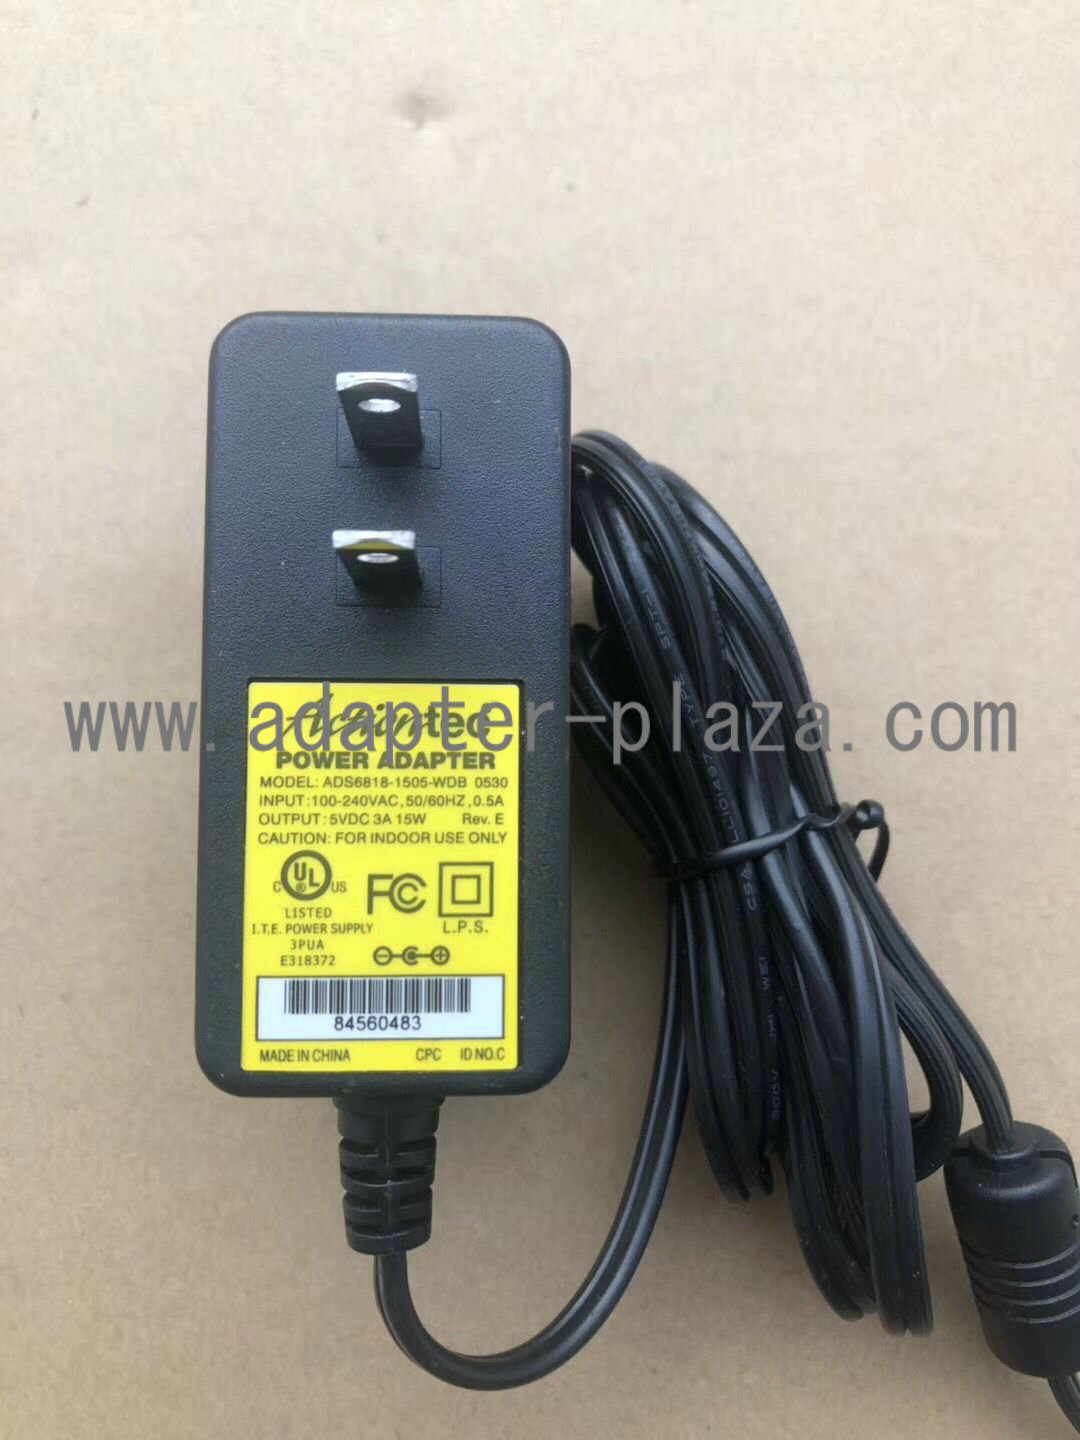 *Brand NEW*Actiontec ADS6818-1505-WDB 0530 5VDC 3A 15W AC DC Adapter POWER SUPPLY